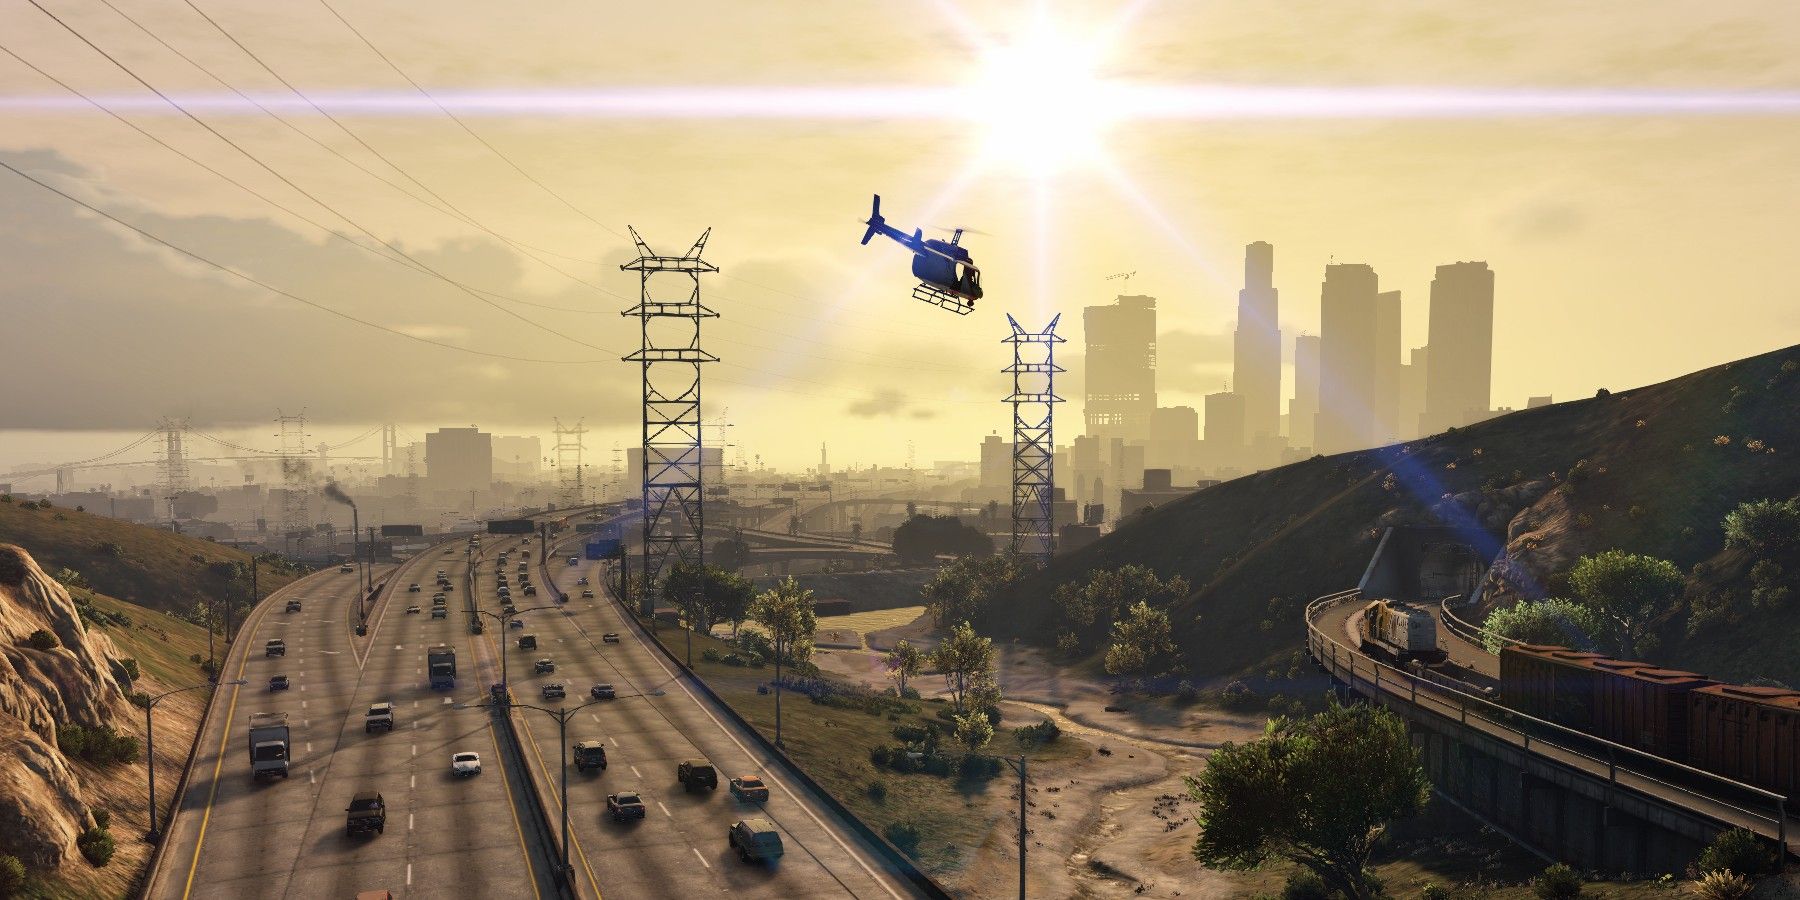 Grand Theft Auto: Rockstar finally confirms it is working on a follow up to GTA  V - nine years after its release, Ents & Arts News